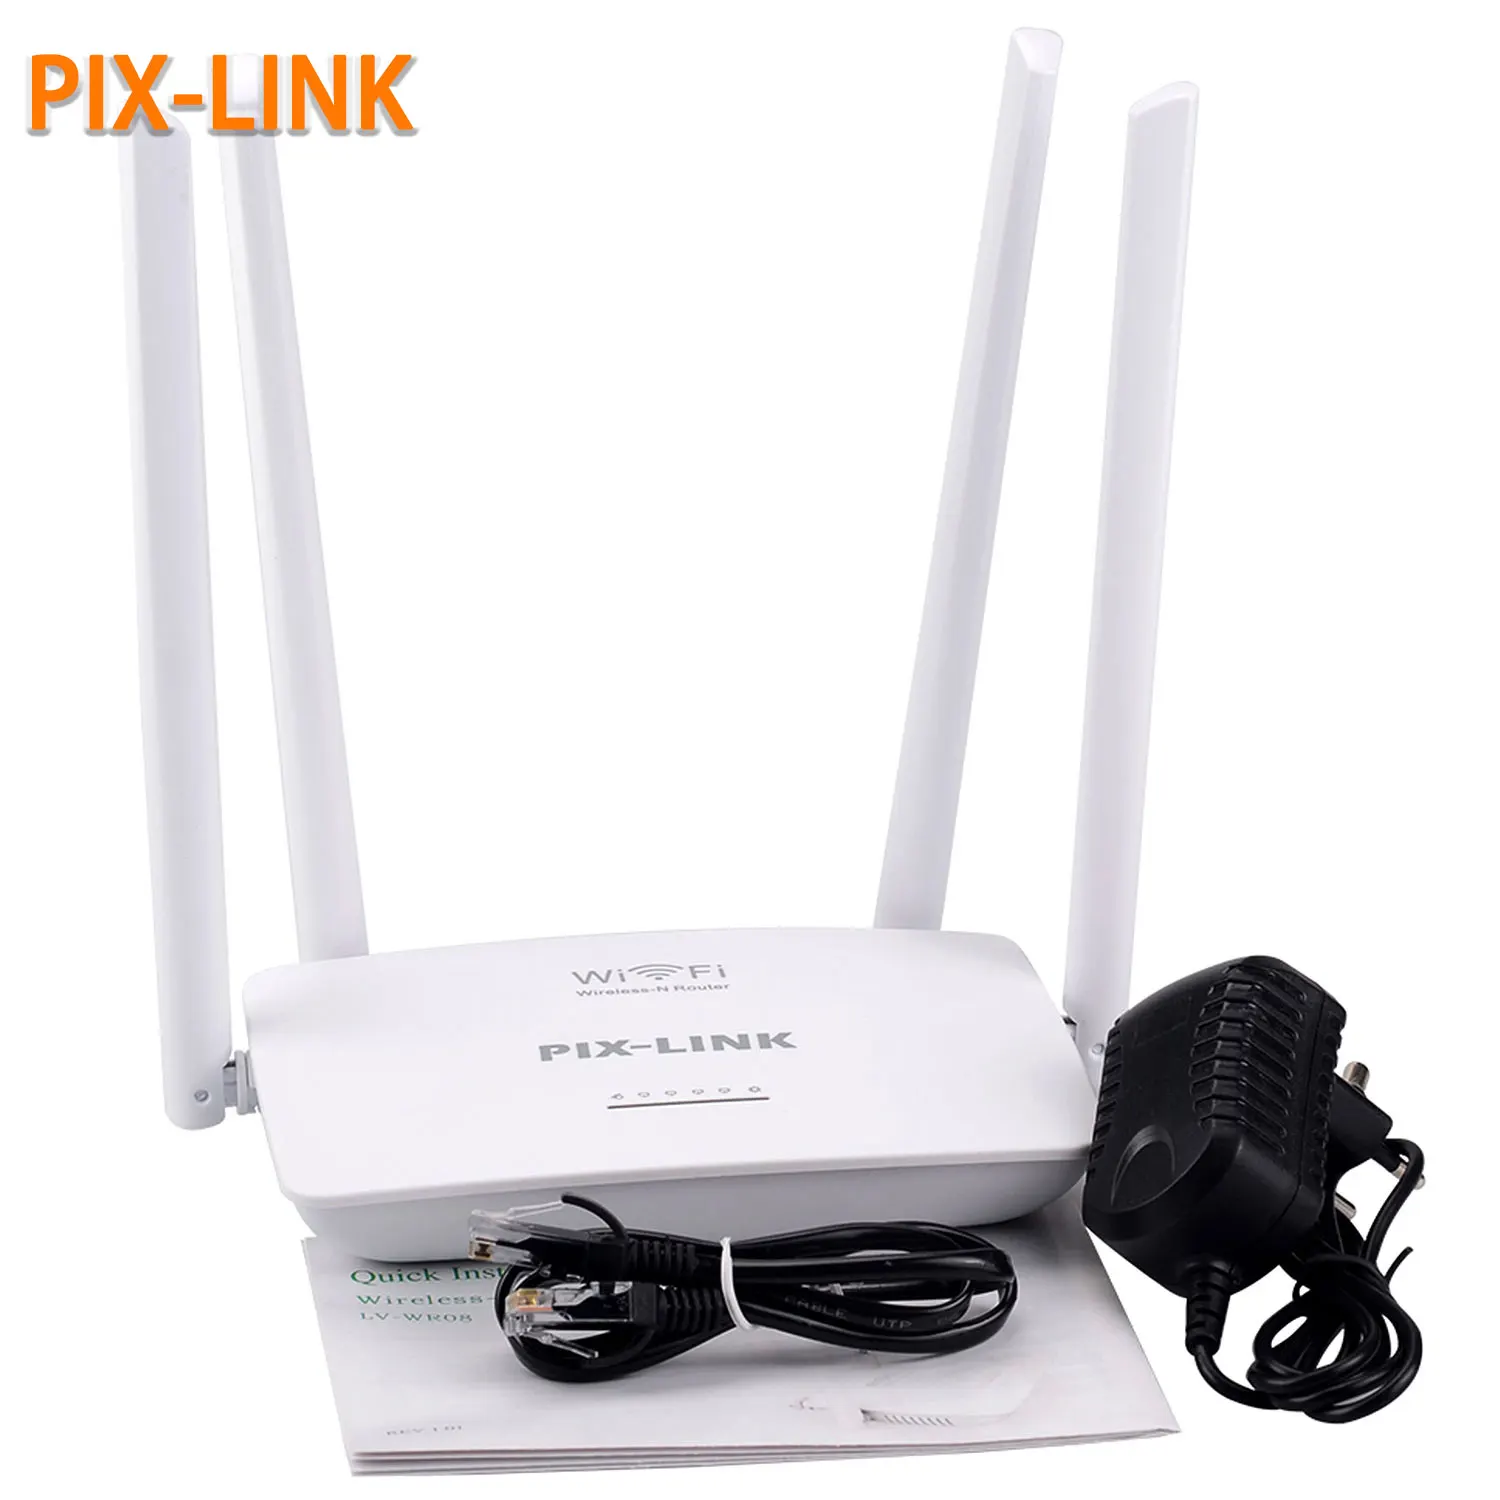 

Wireless Wifi Repeater Router Signal-Amplifier Extender-5g 5ghz 1200mbps Long-Range